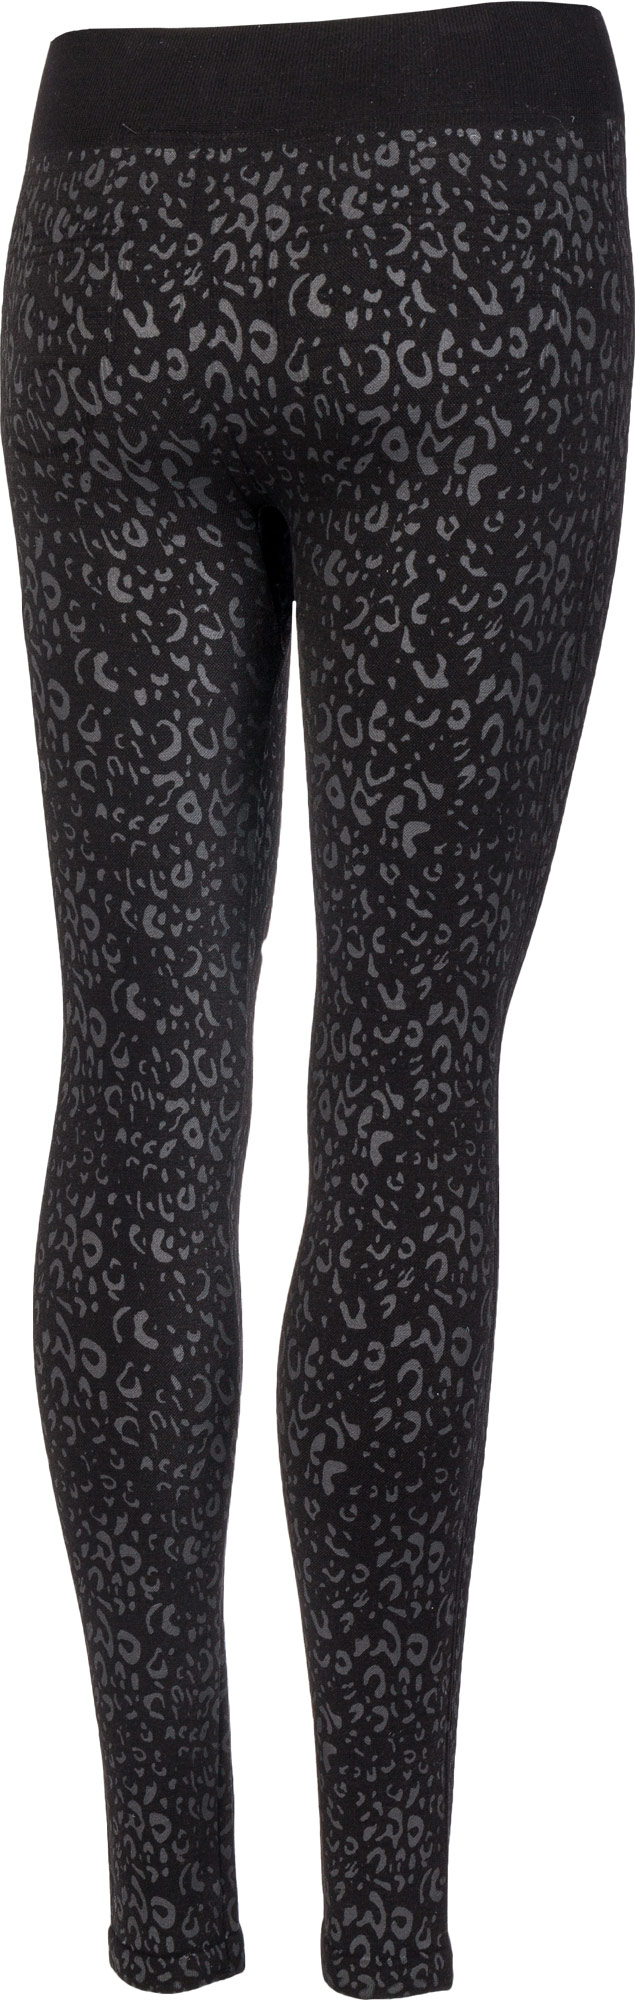 Women's insulated tights